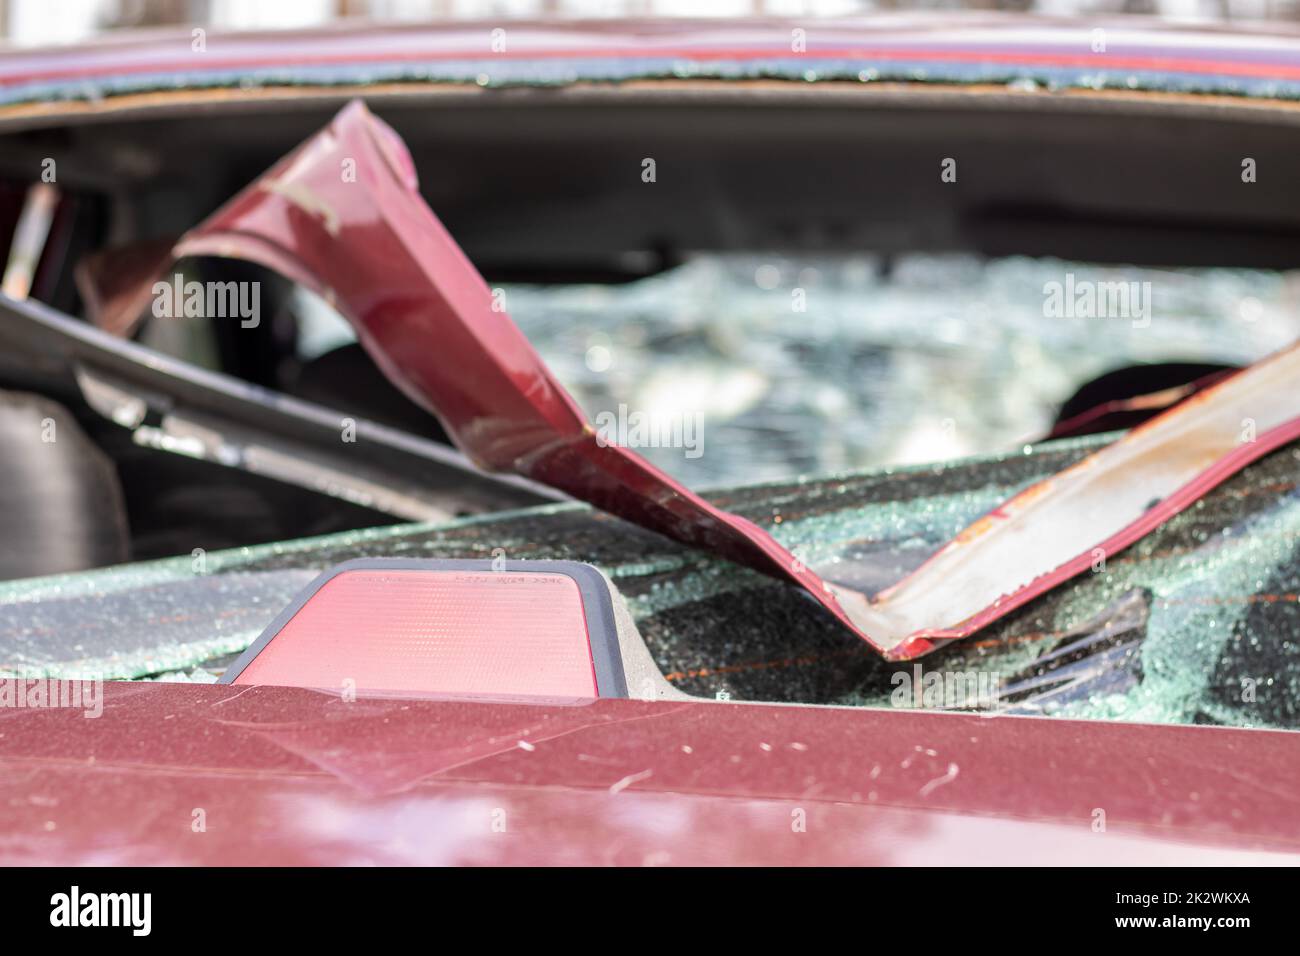 A car after an accident with a broken rear window. Broken window in a vehicle with a rear brake light. Interior wreckage, detailed close-up view of a damaged modern car. Stock Photo